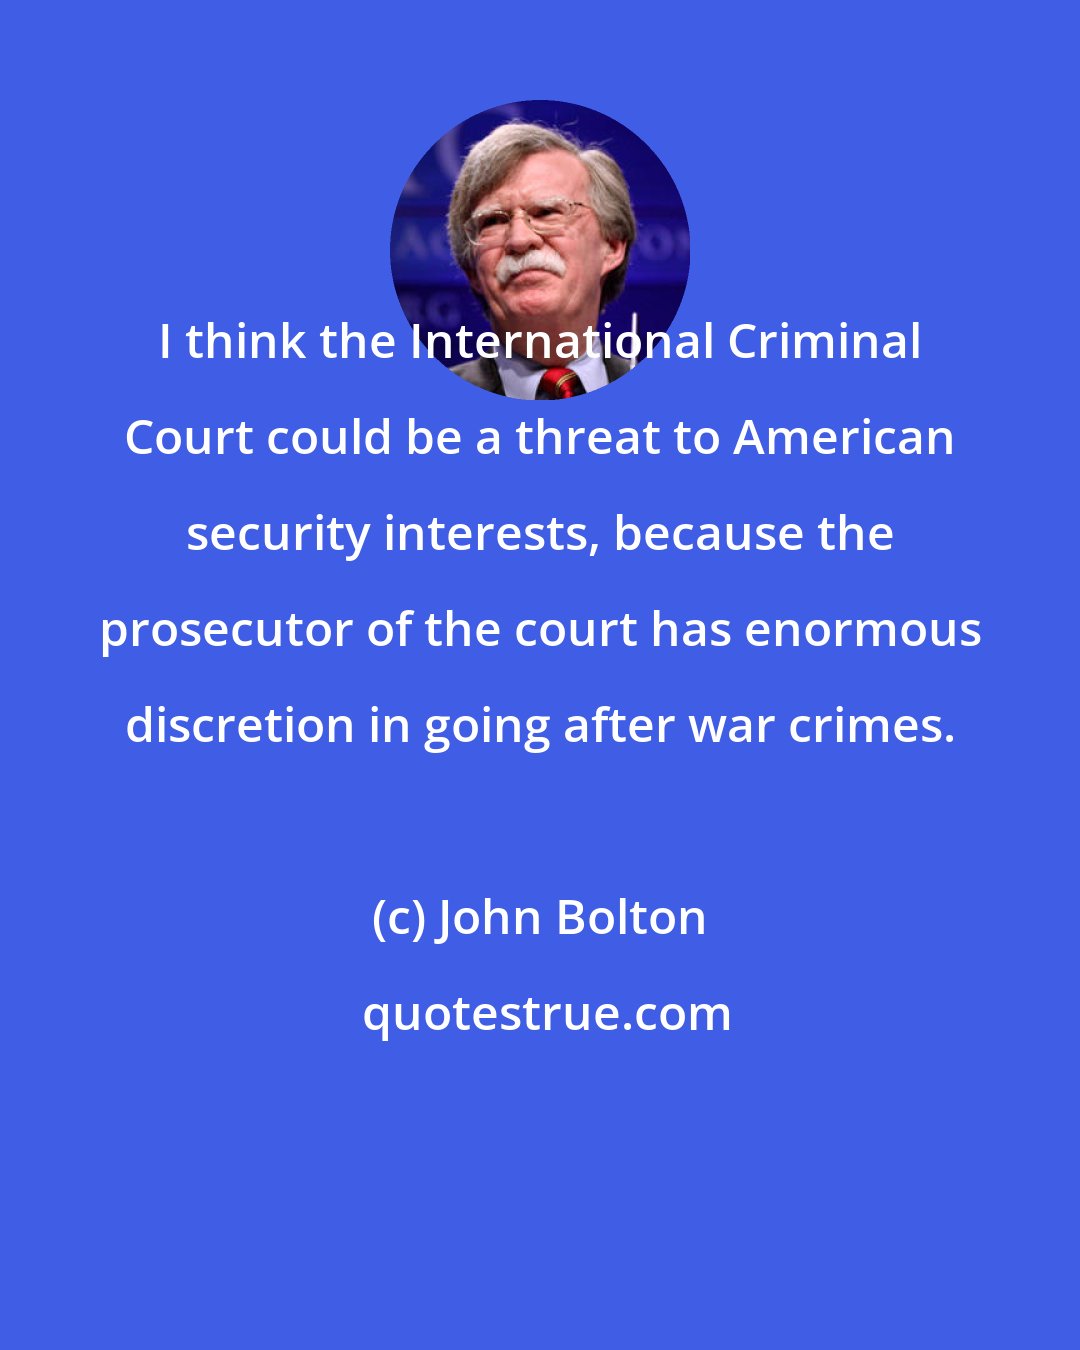 John Bolton: I think the International Criminal Court could be a threat to American security interests, because the prosecutor of the court has enormous discretion in going after war crimes.